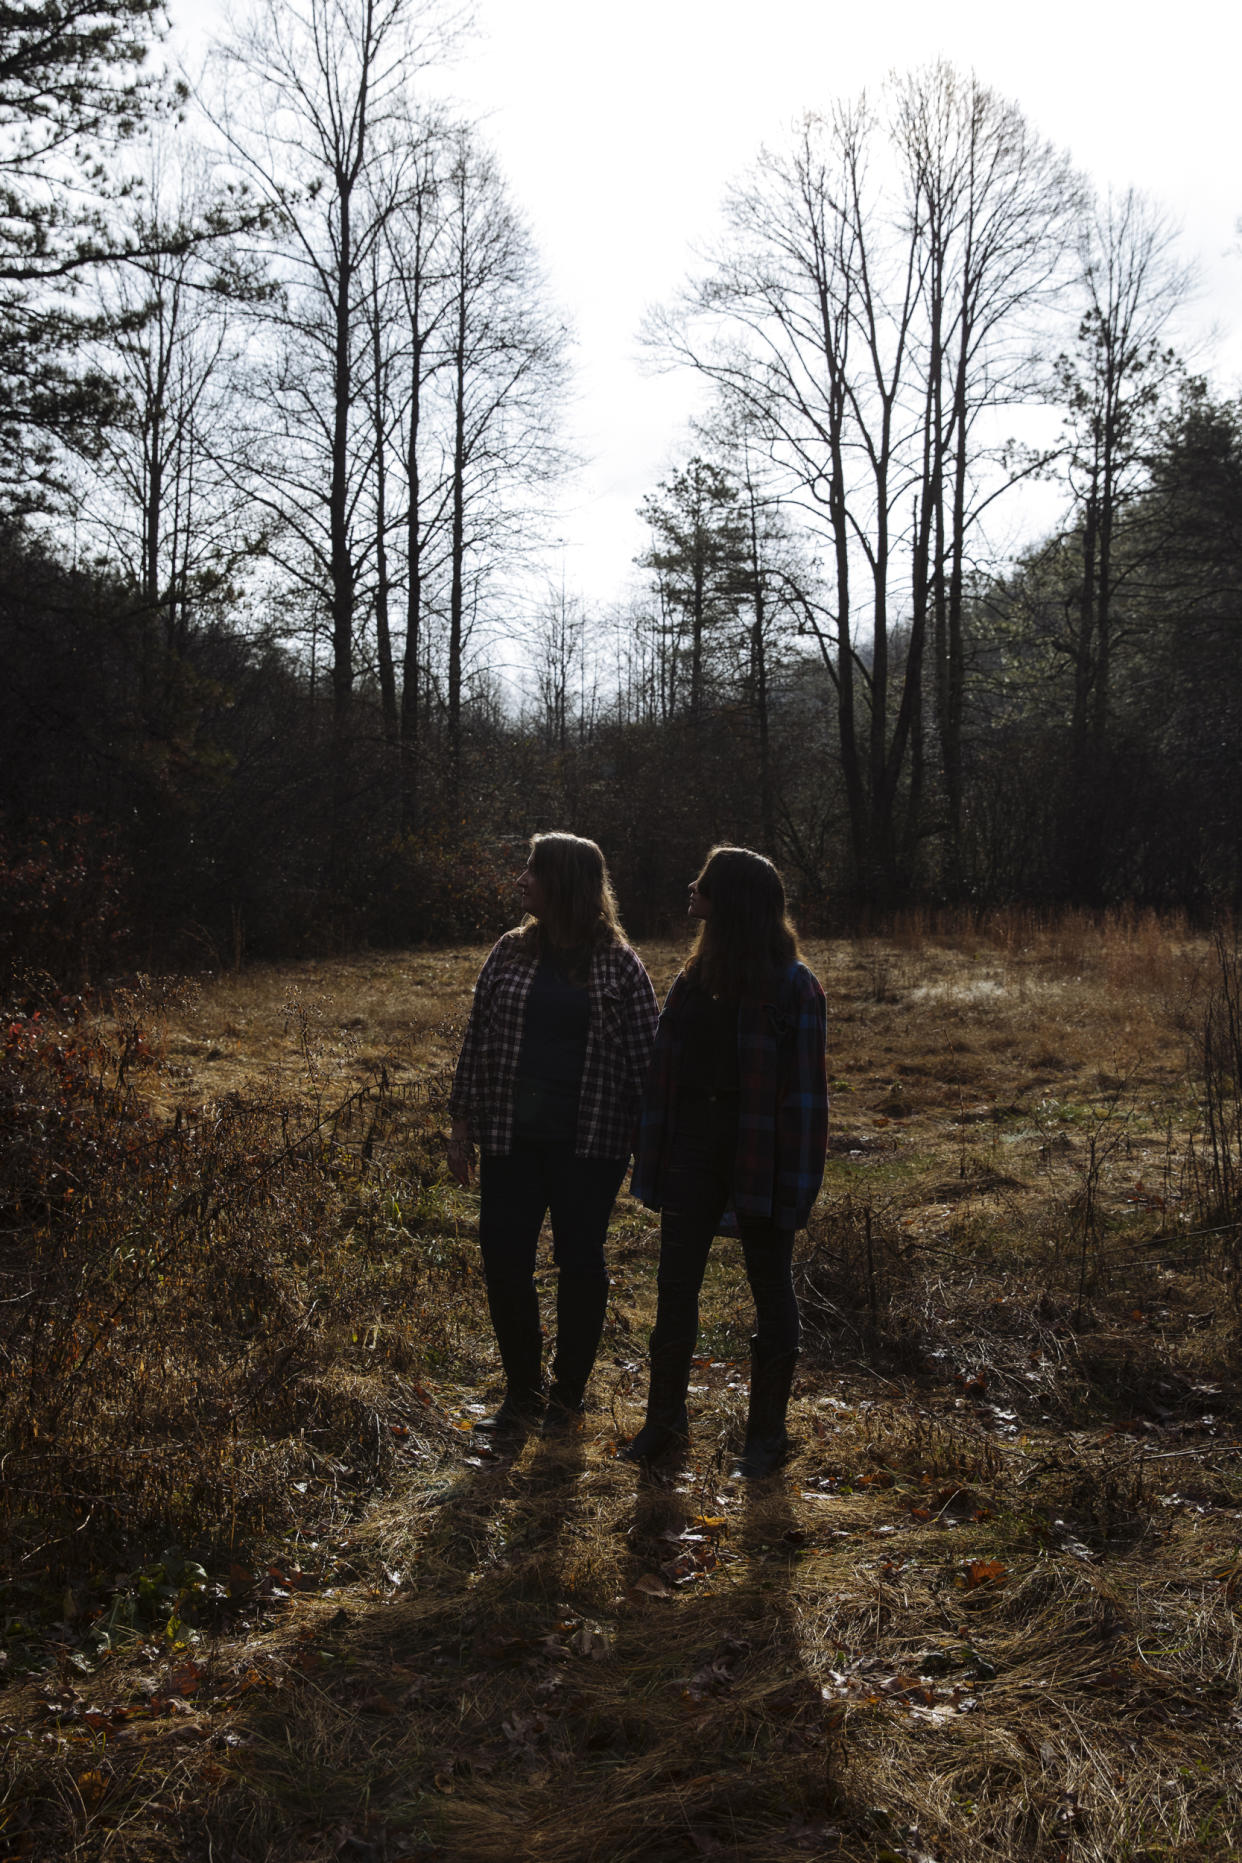 Marcella and her daughter Riley, 15, at their home in Cherokee County, N.C., on Dec. 4, 2022. Riley was sexually assaulted and later harassed by her fellow students at Andrews Middle School in Andrews, N.C. (Kendrick Brinson for NBC News)